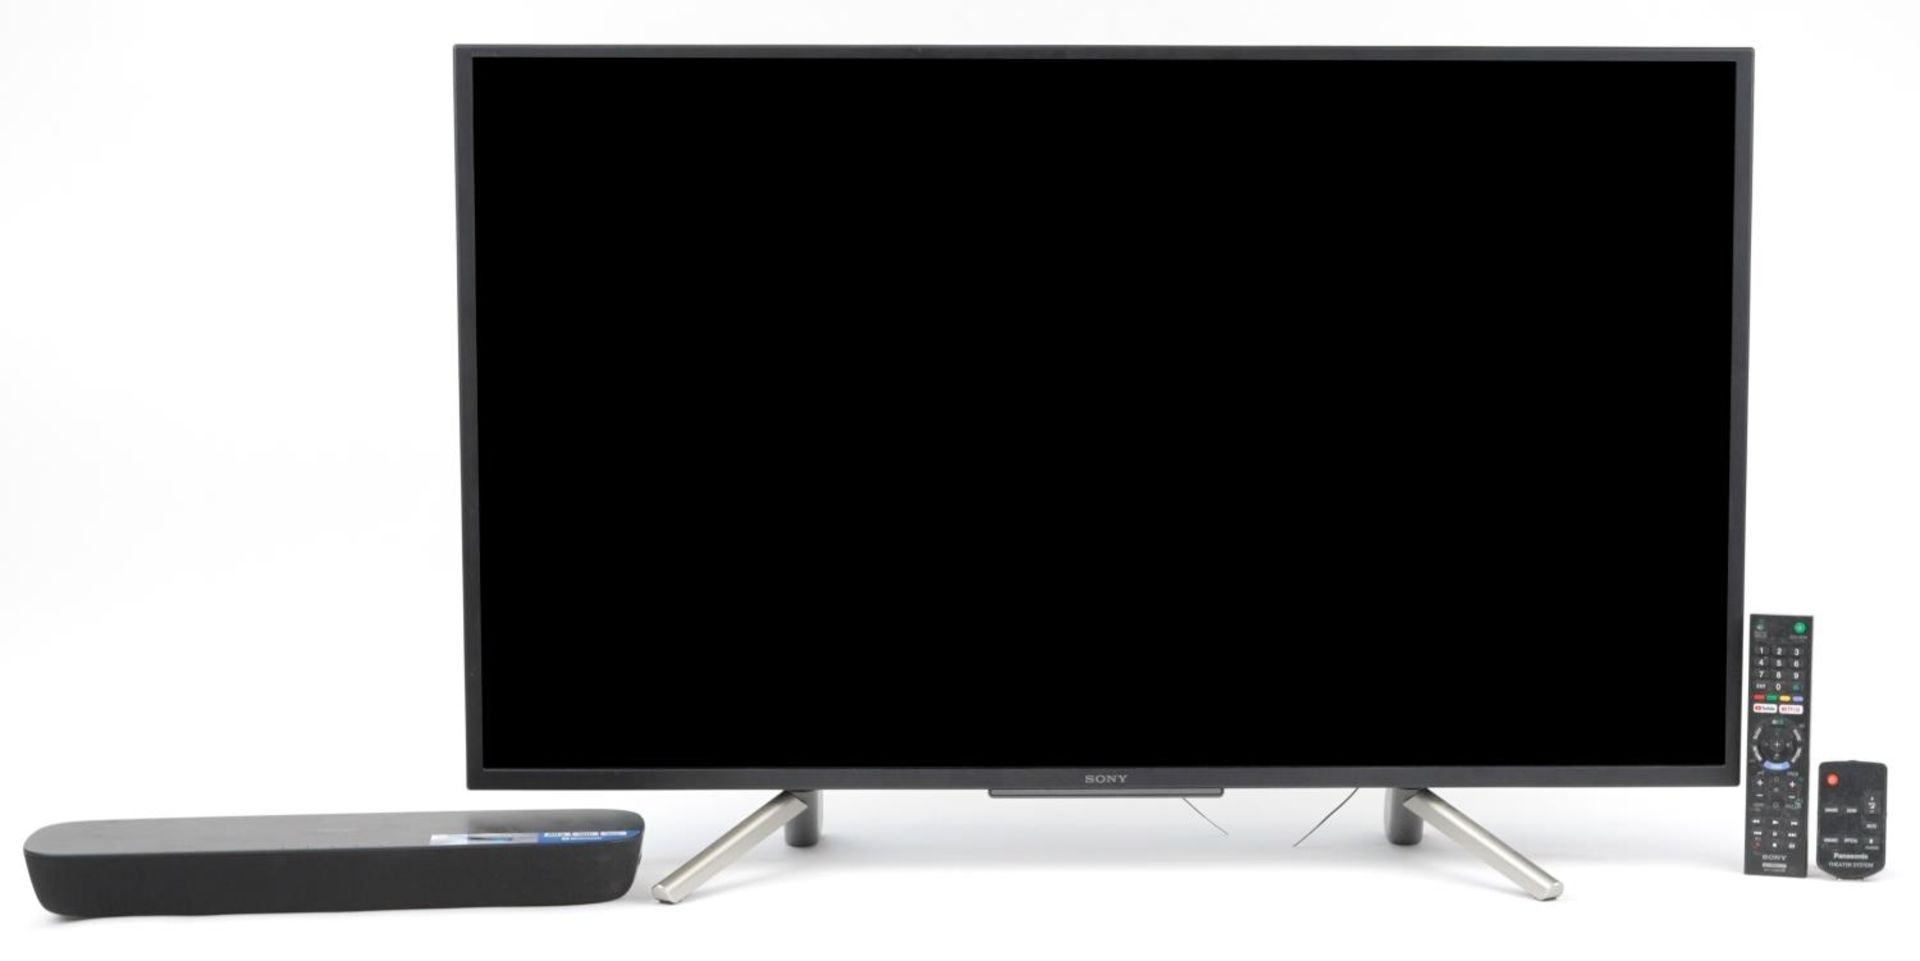 Sony Bravia 43 inch LED Television with remote control, model KDL-43WF663 and a Panasonic sound